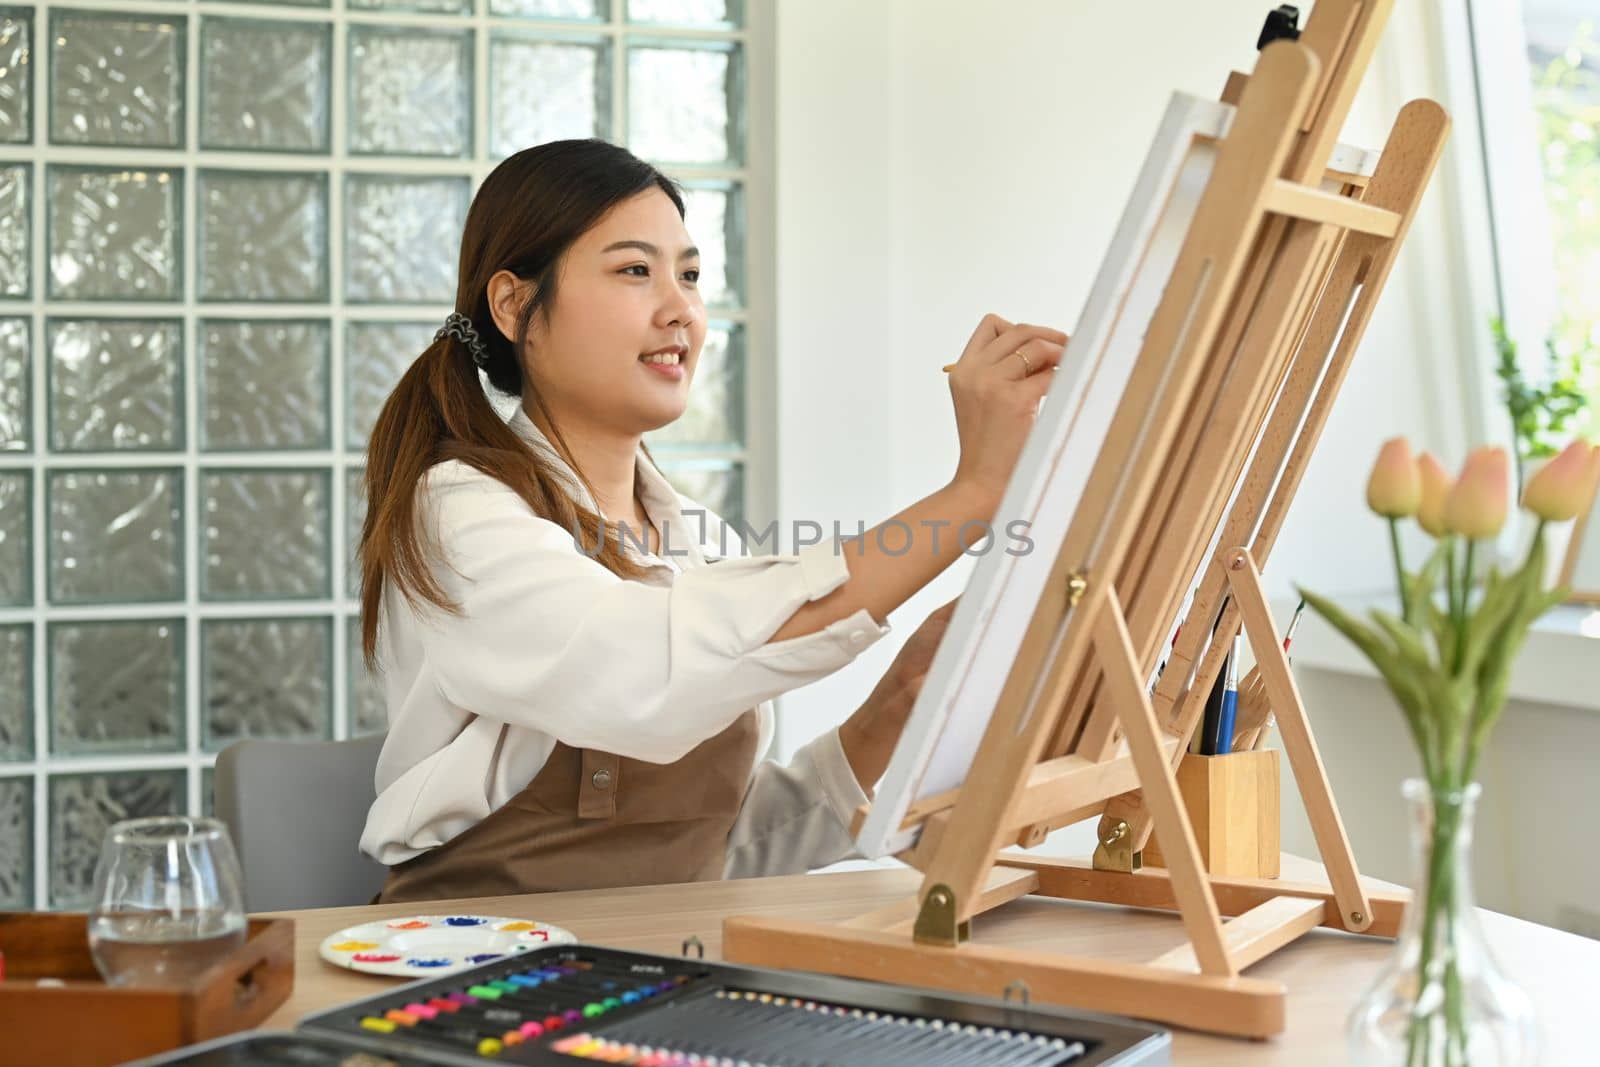 Attractive female artist painting with watercolor on canvas in art workshop. Art, creative hobby and leisure activity concept by prathanchorruangsak